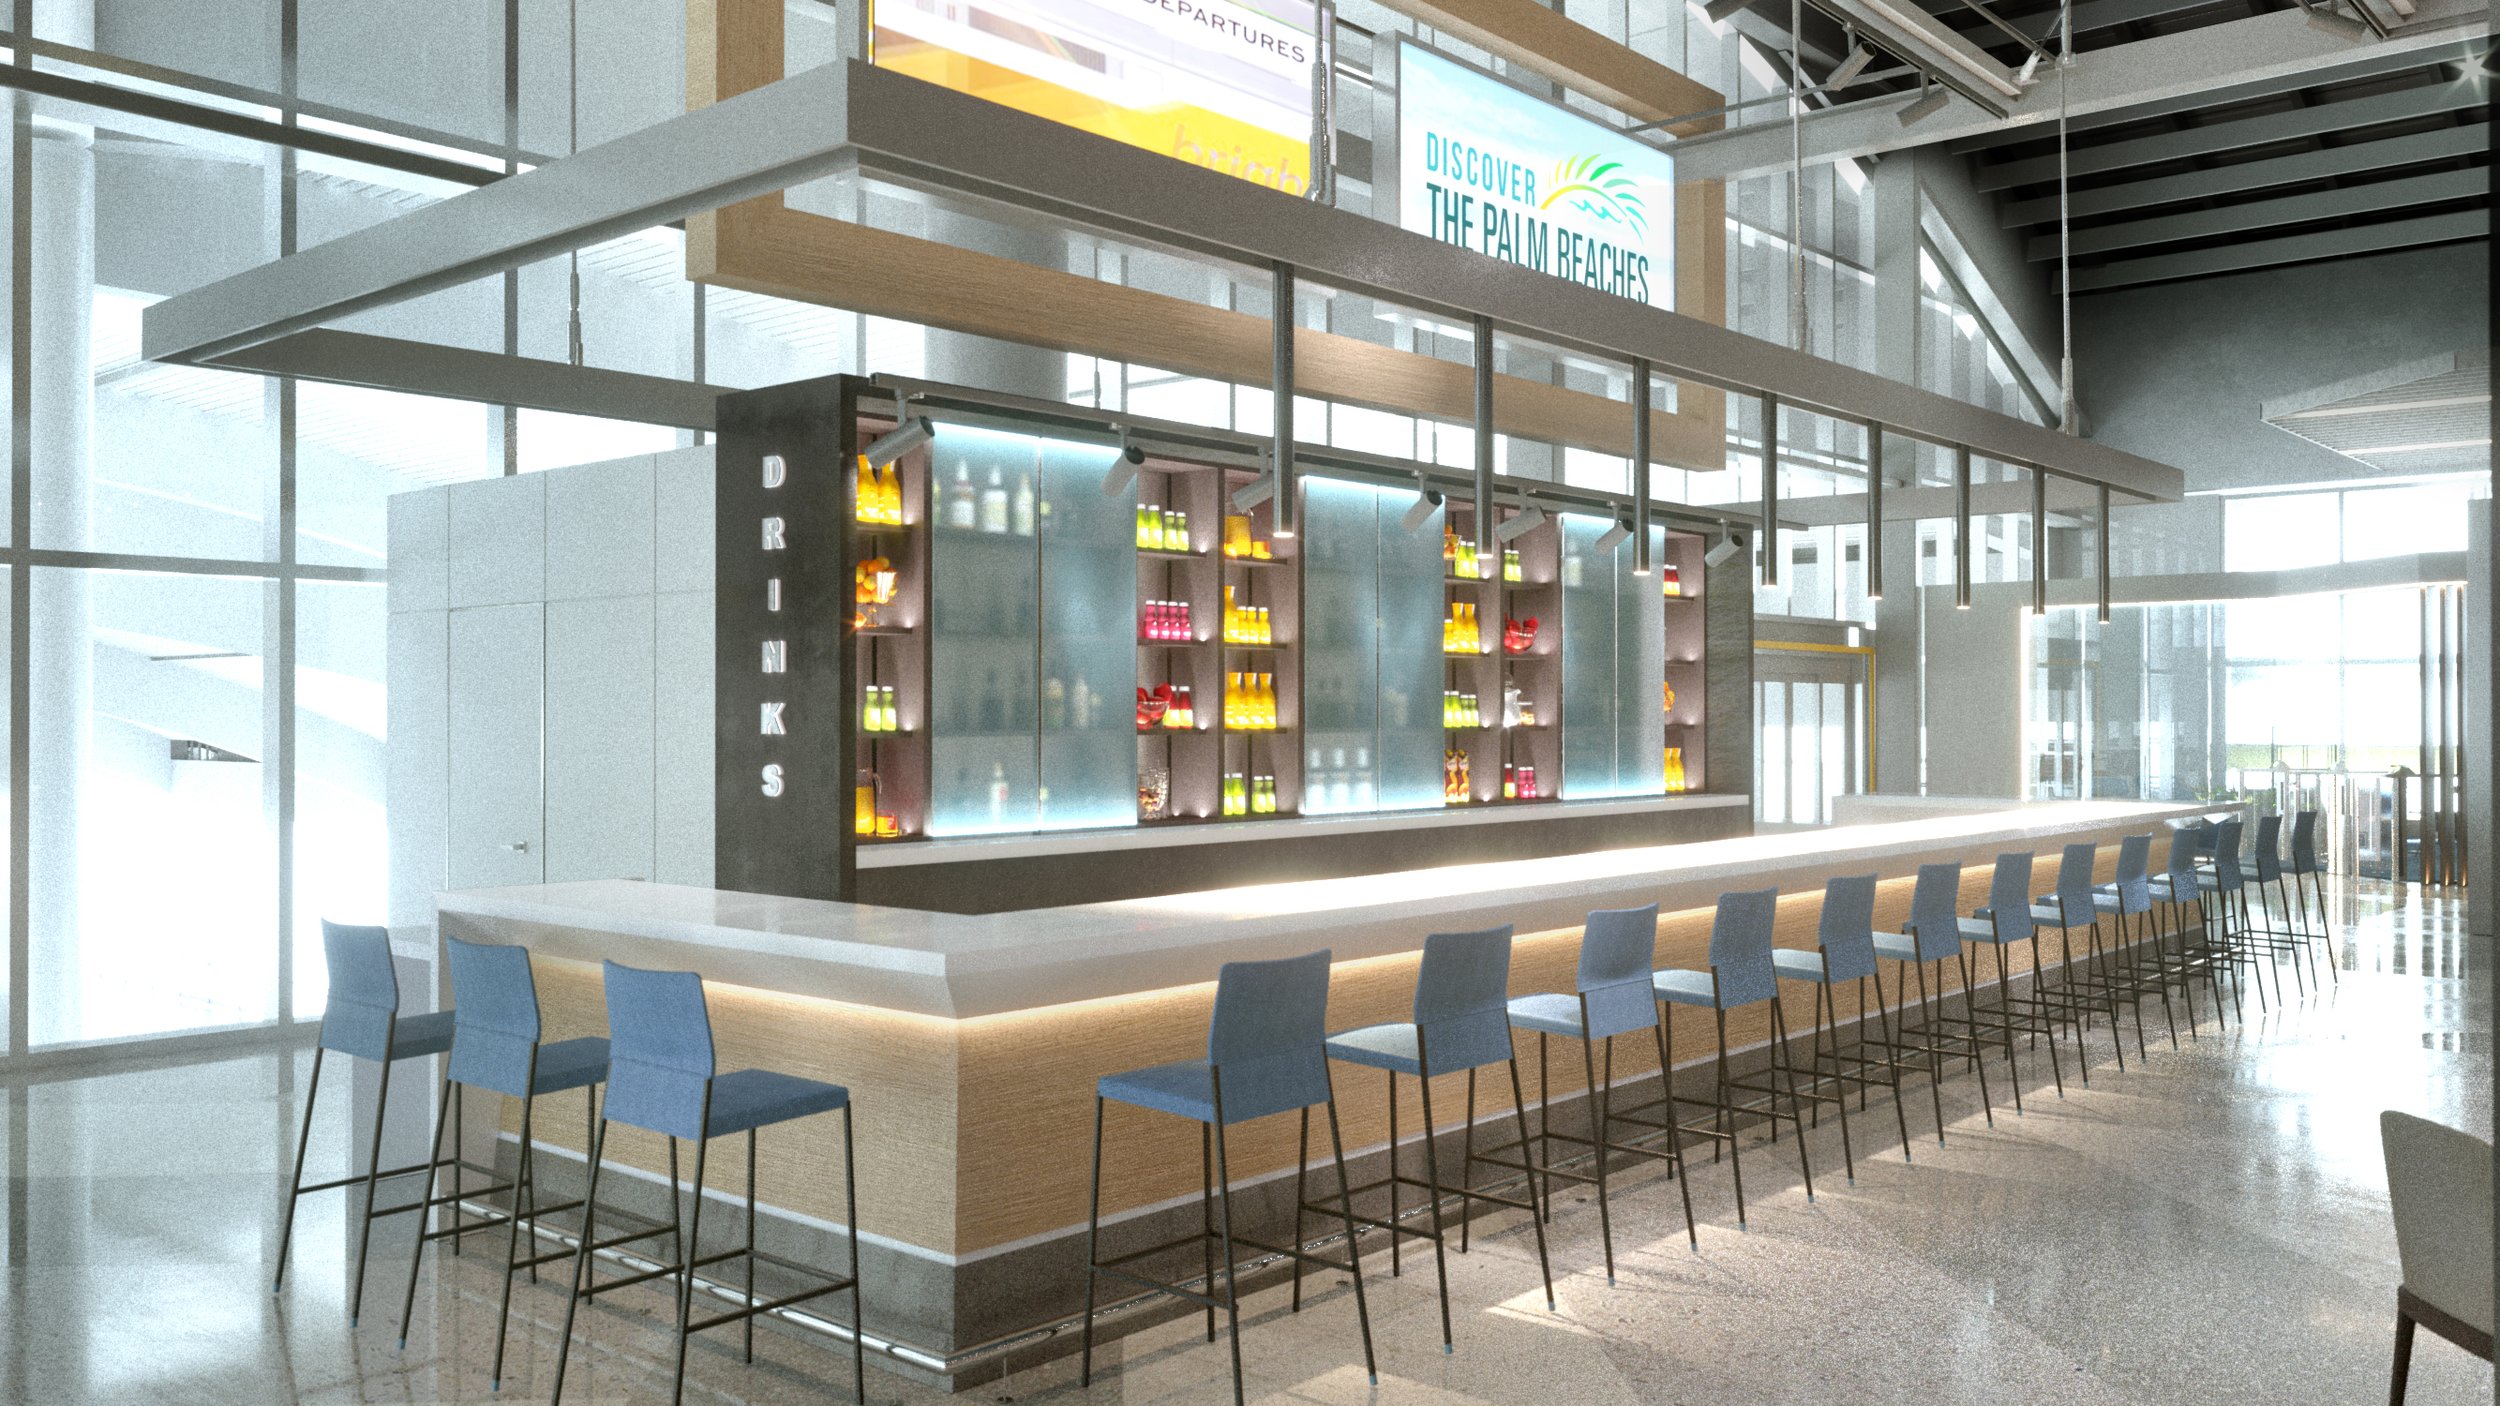 Brightline Reveals New Renderings Giving First Look Inside Its Future Orlando Station 11.jpg